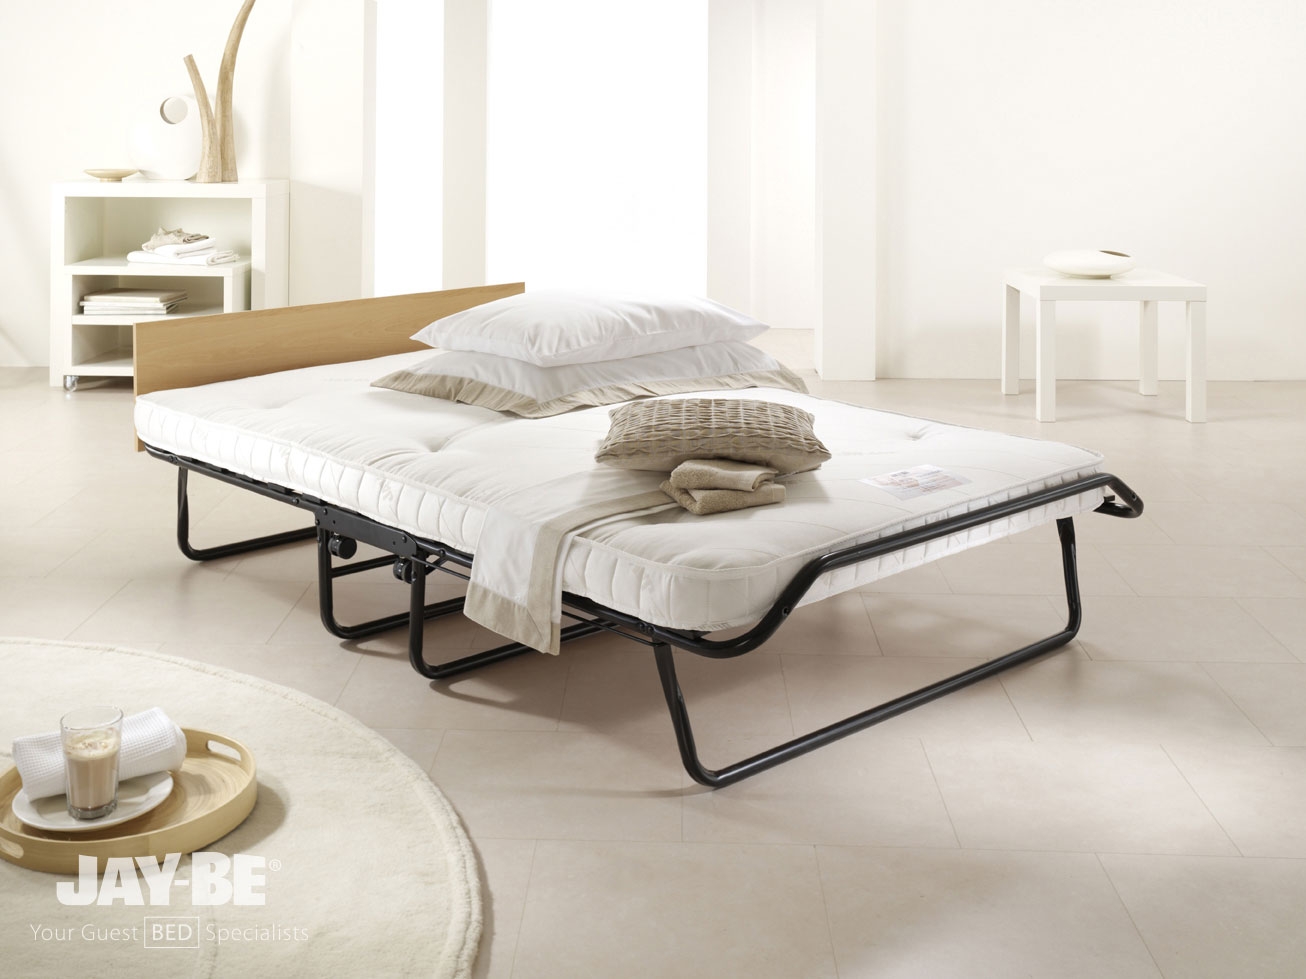 Royal Pocket Sprung Double Folding Bed